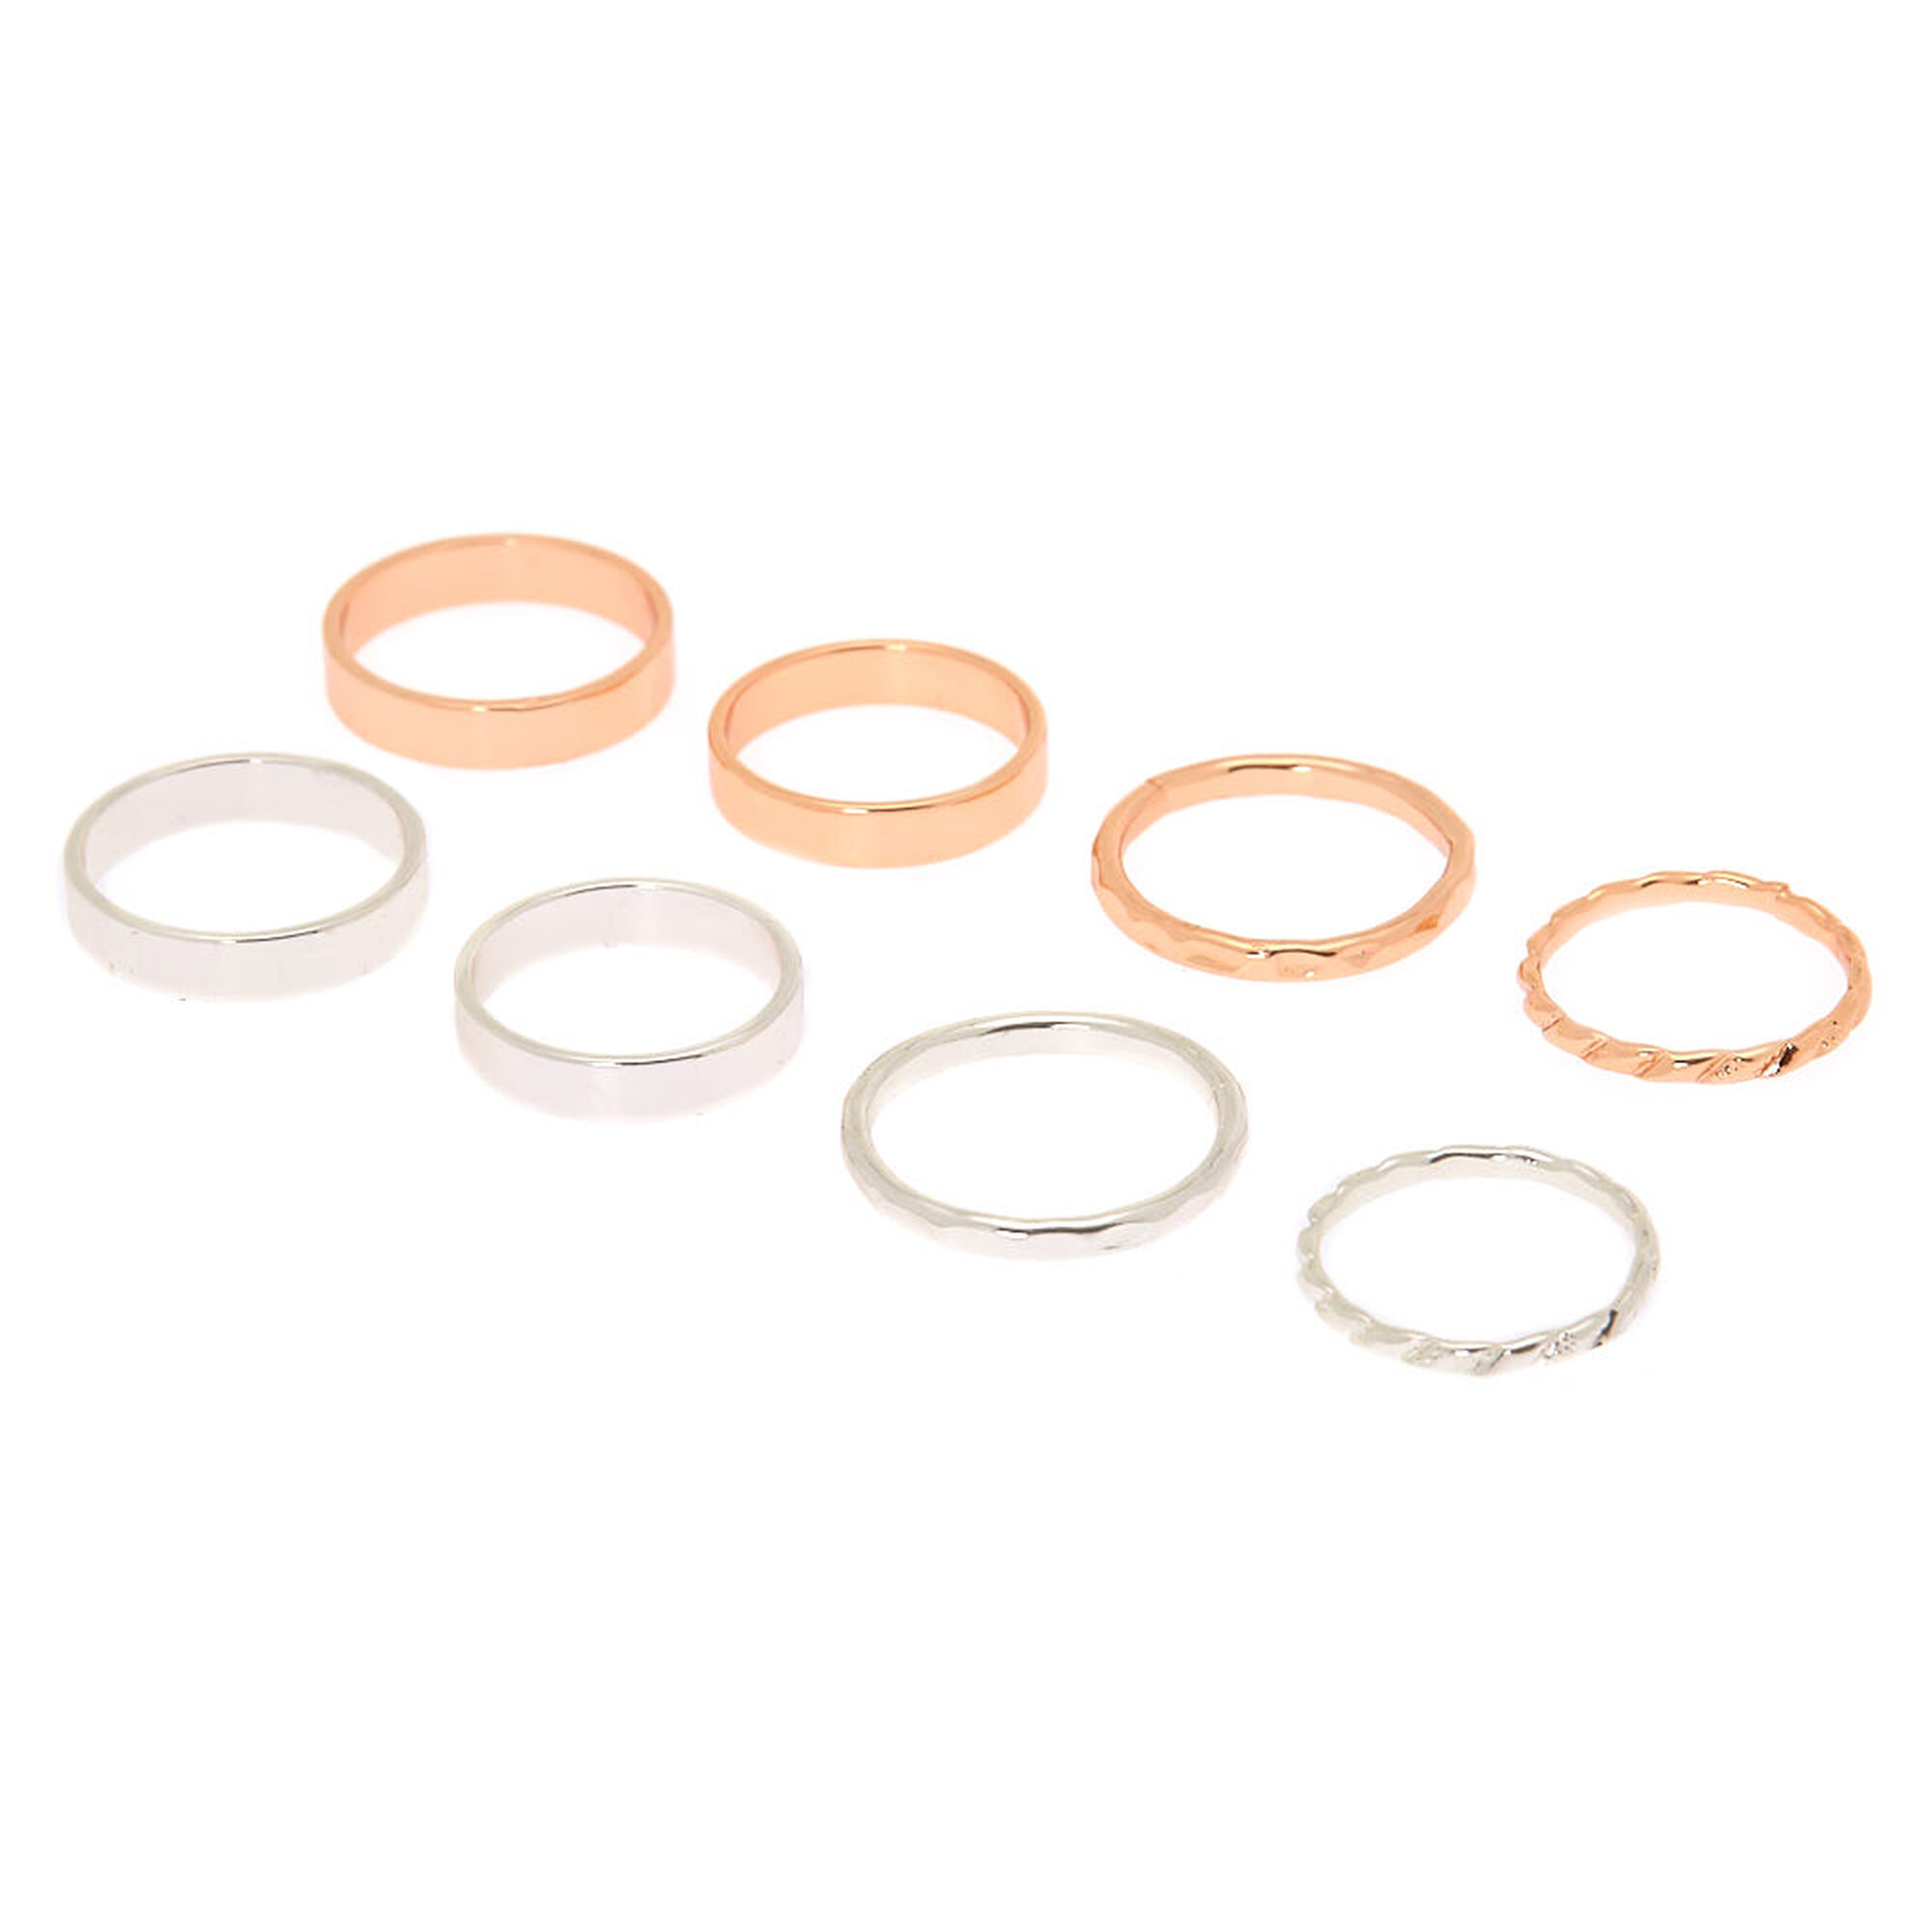 View Claires Mixed Metal Simplicity Rings 8 Pack information